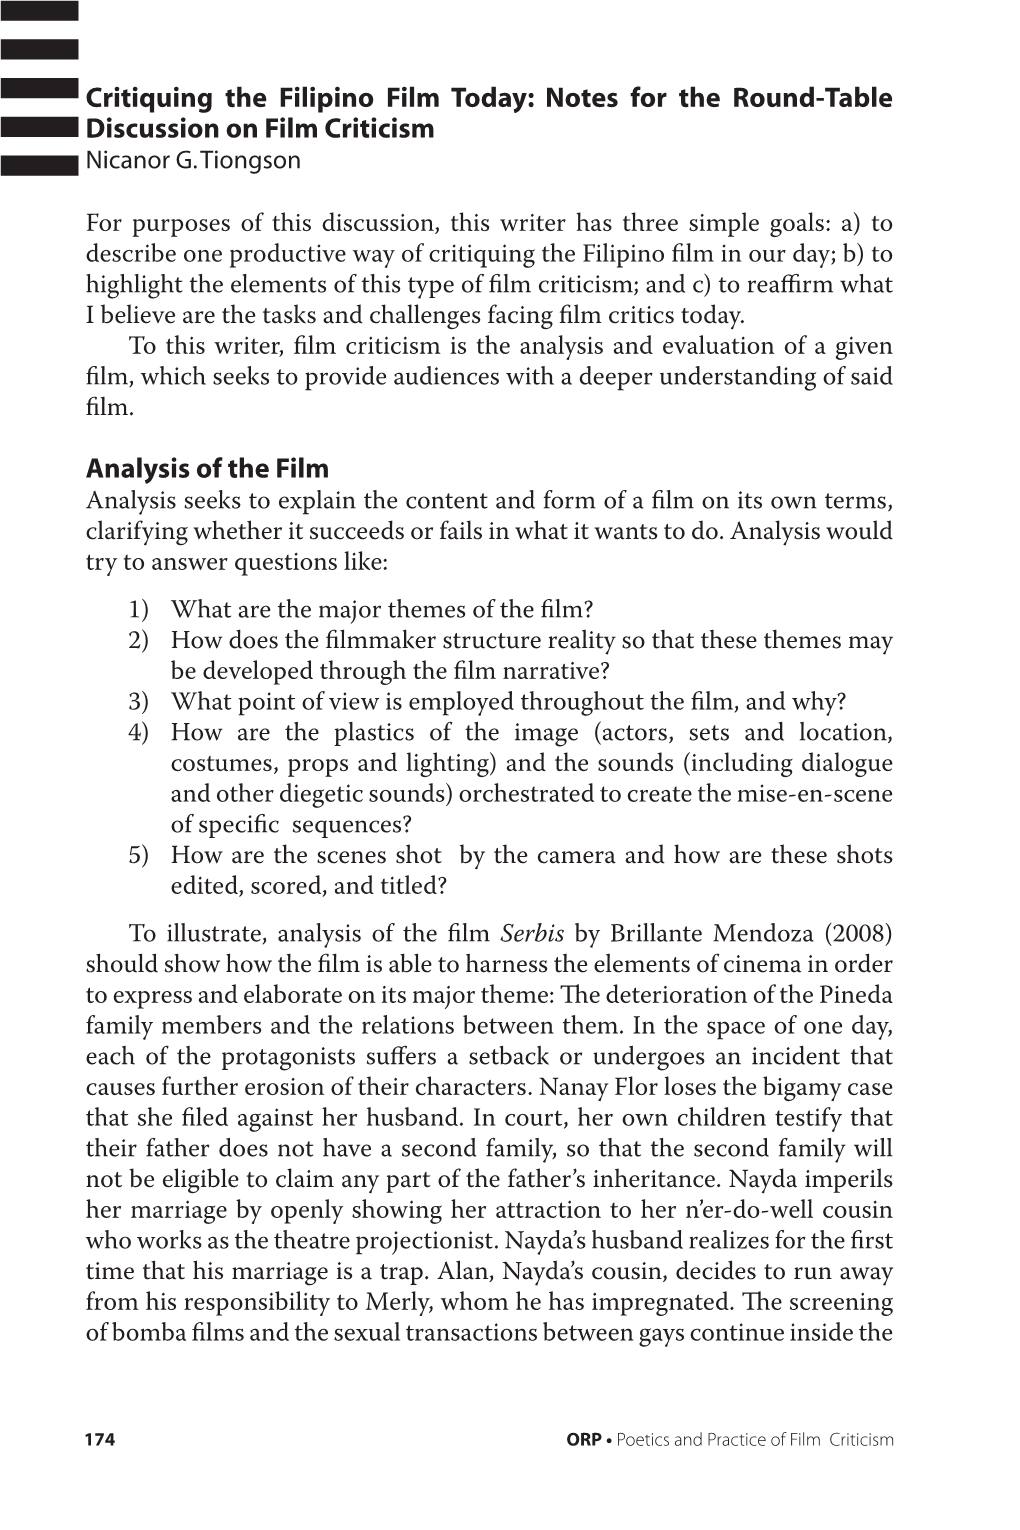 Notes for the Round-Table Discussion on Film Criticism Nicanor G